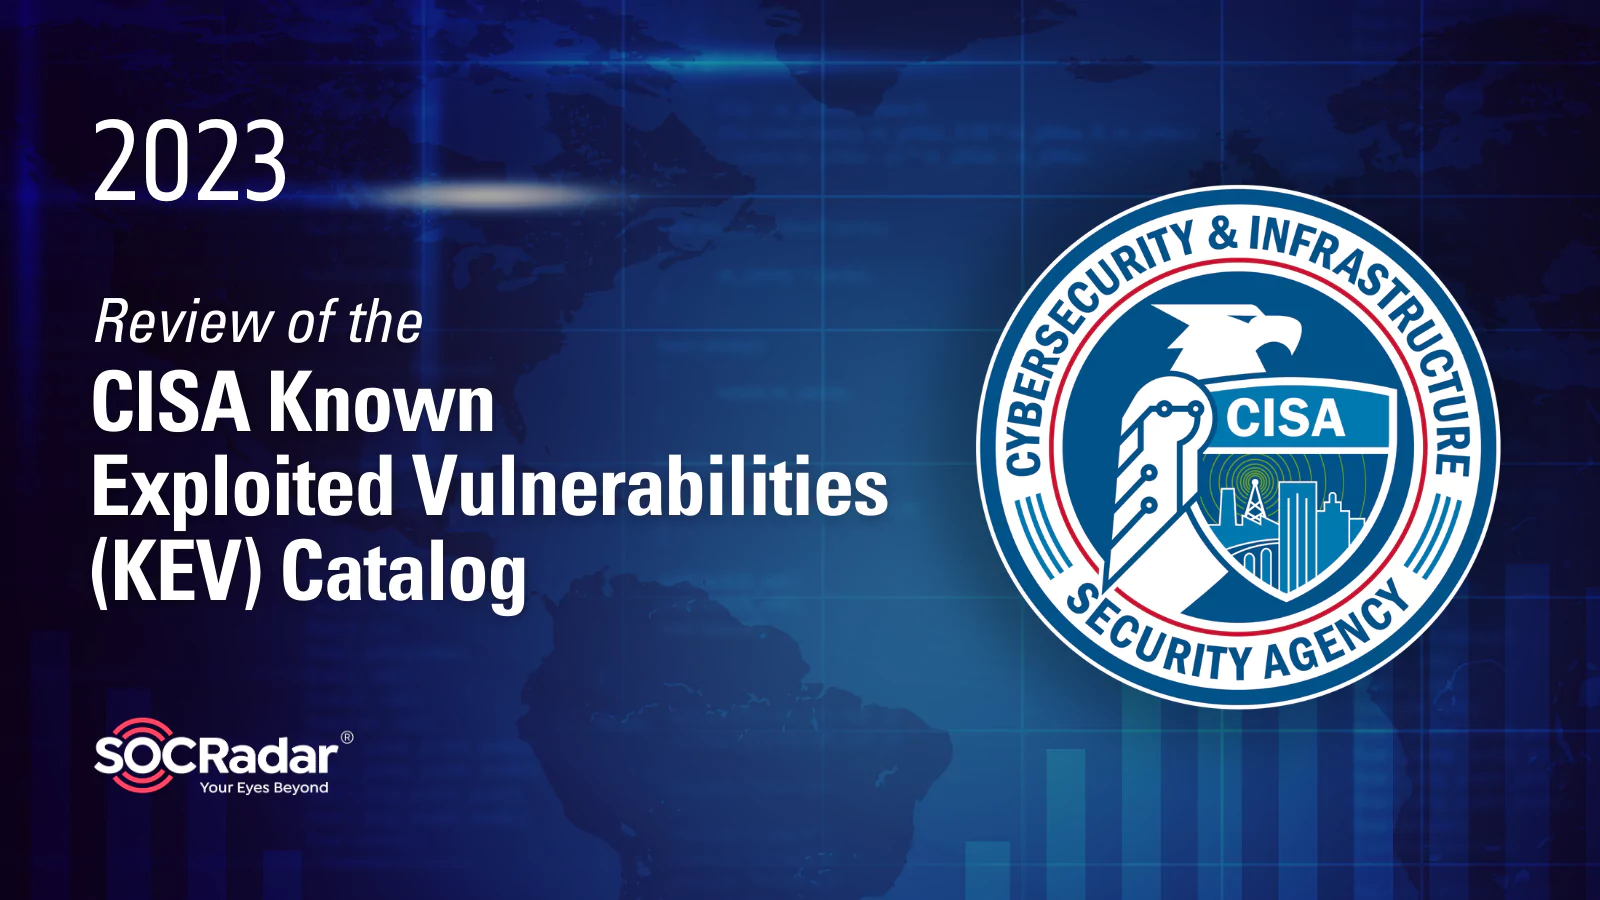 SOCRadar® Cyber Intelligence Inc. | 2023 Review of the CISA Known Exploited Vulnerabilities (KEV) Catalog